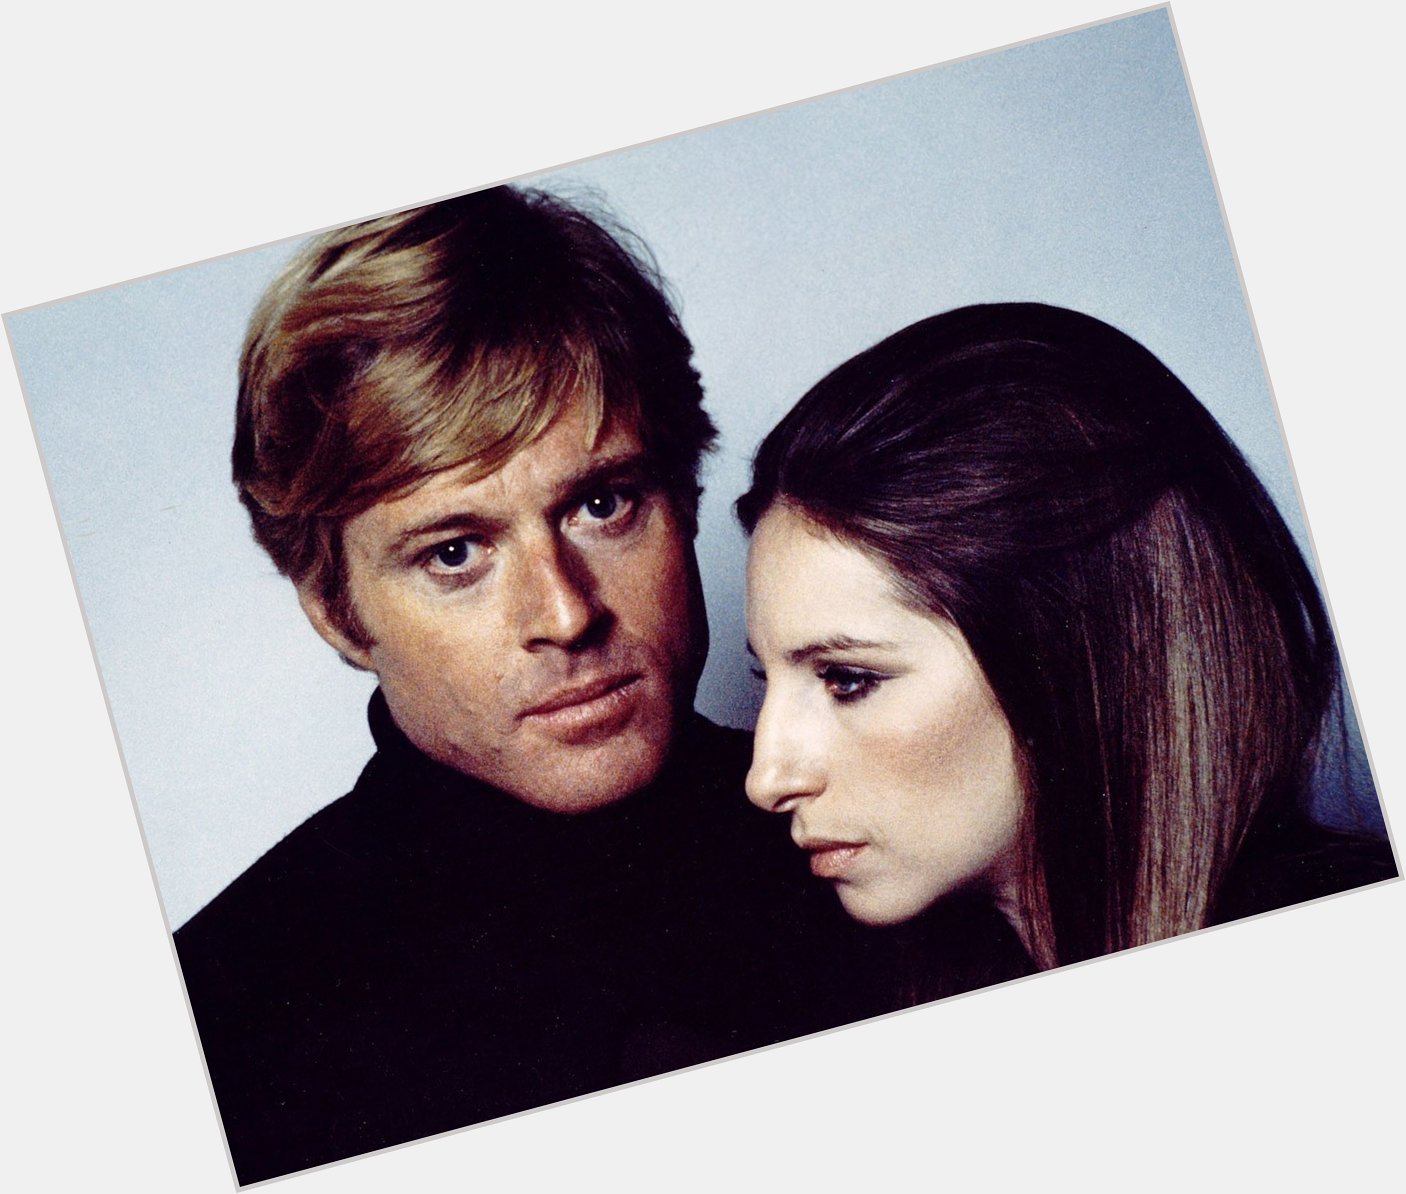 Wishing a very happy 81st birthday to Robert Redford, here with Barbra Streisand in THE WAY WE WERE (\73) 